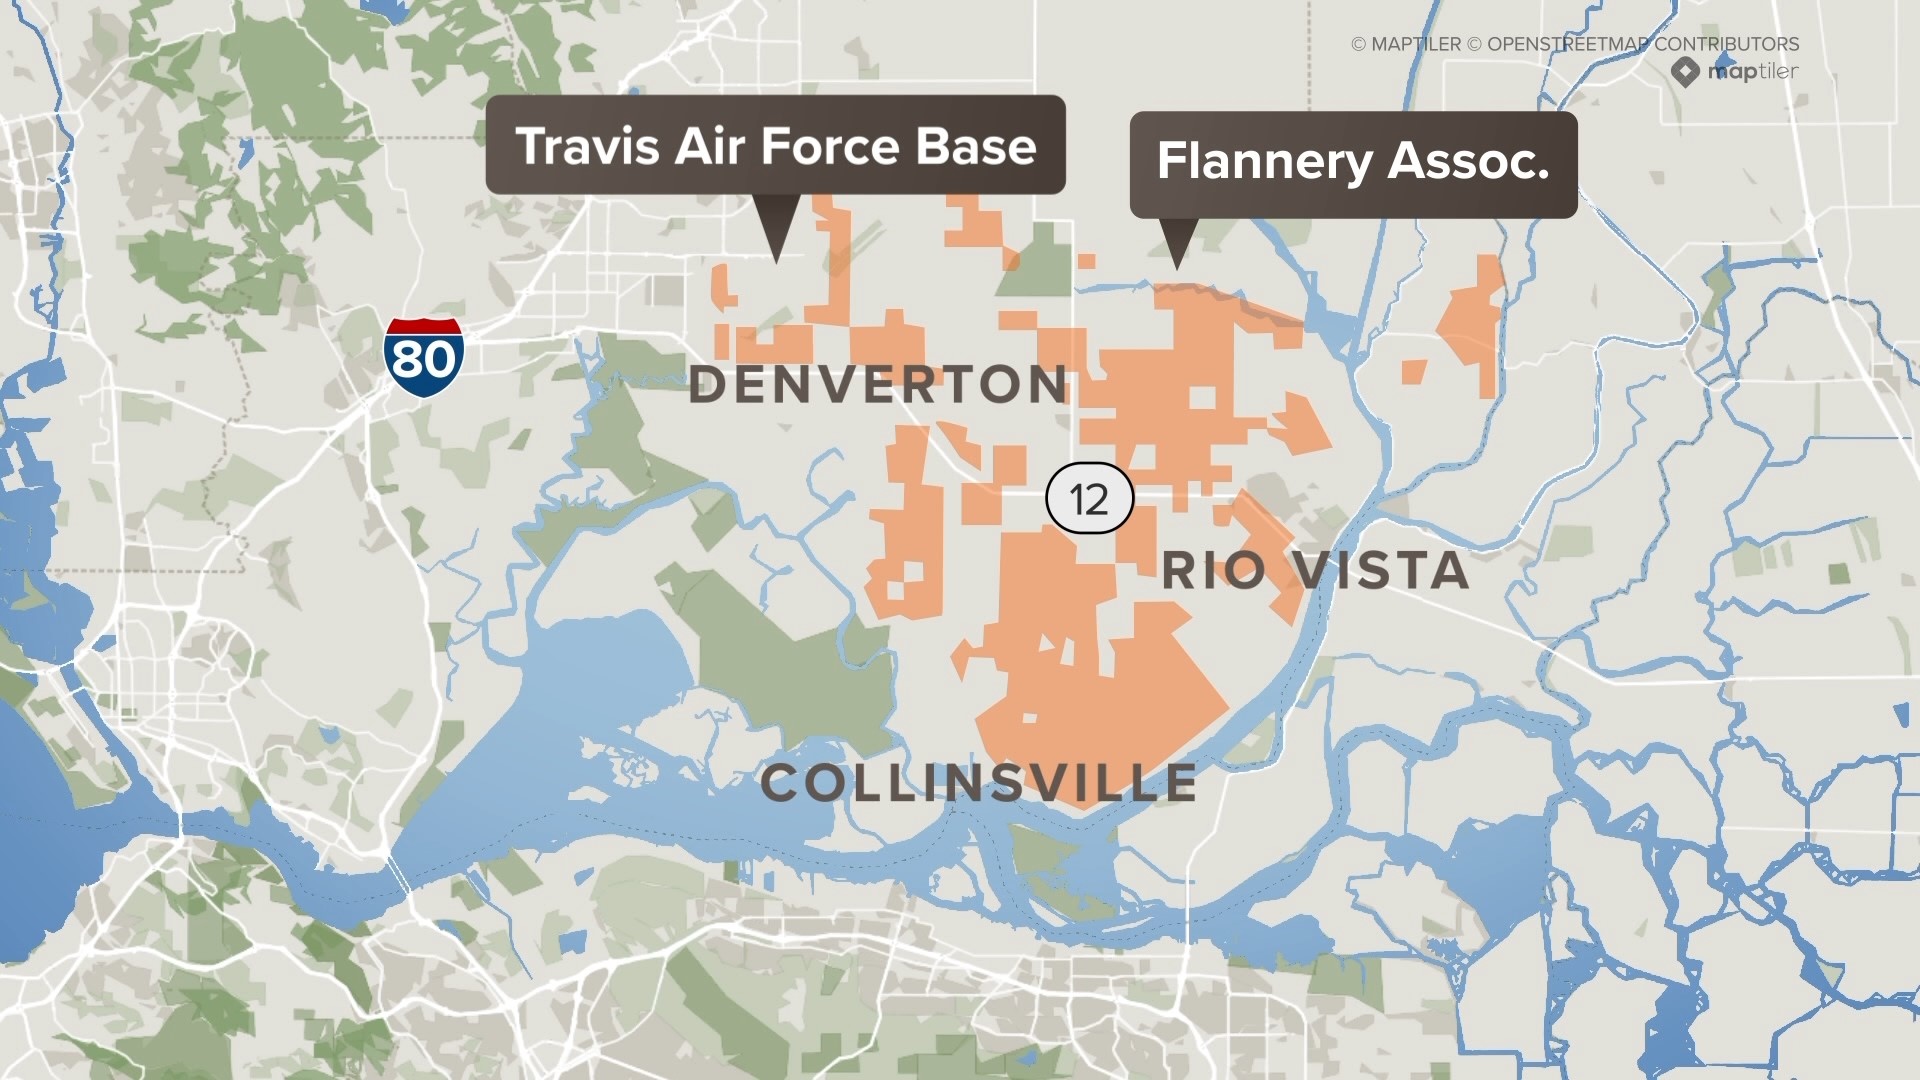 Flannery Associates LLC began buying land in Solano County in 2018 and owns land up to the fence of Travis Air Force Base, something officials call a security risk